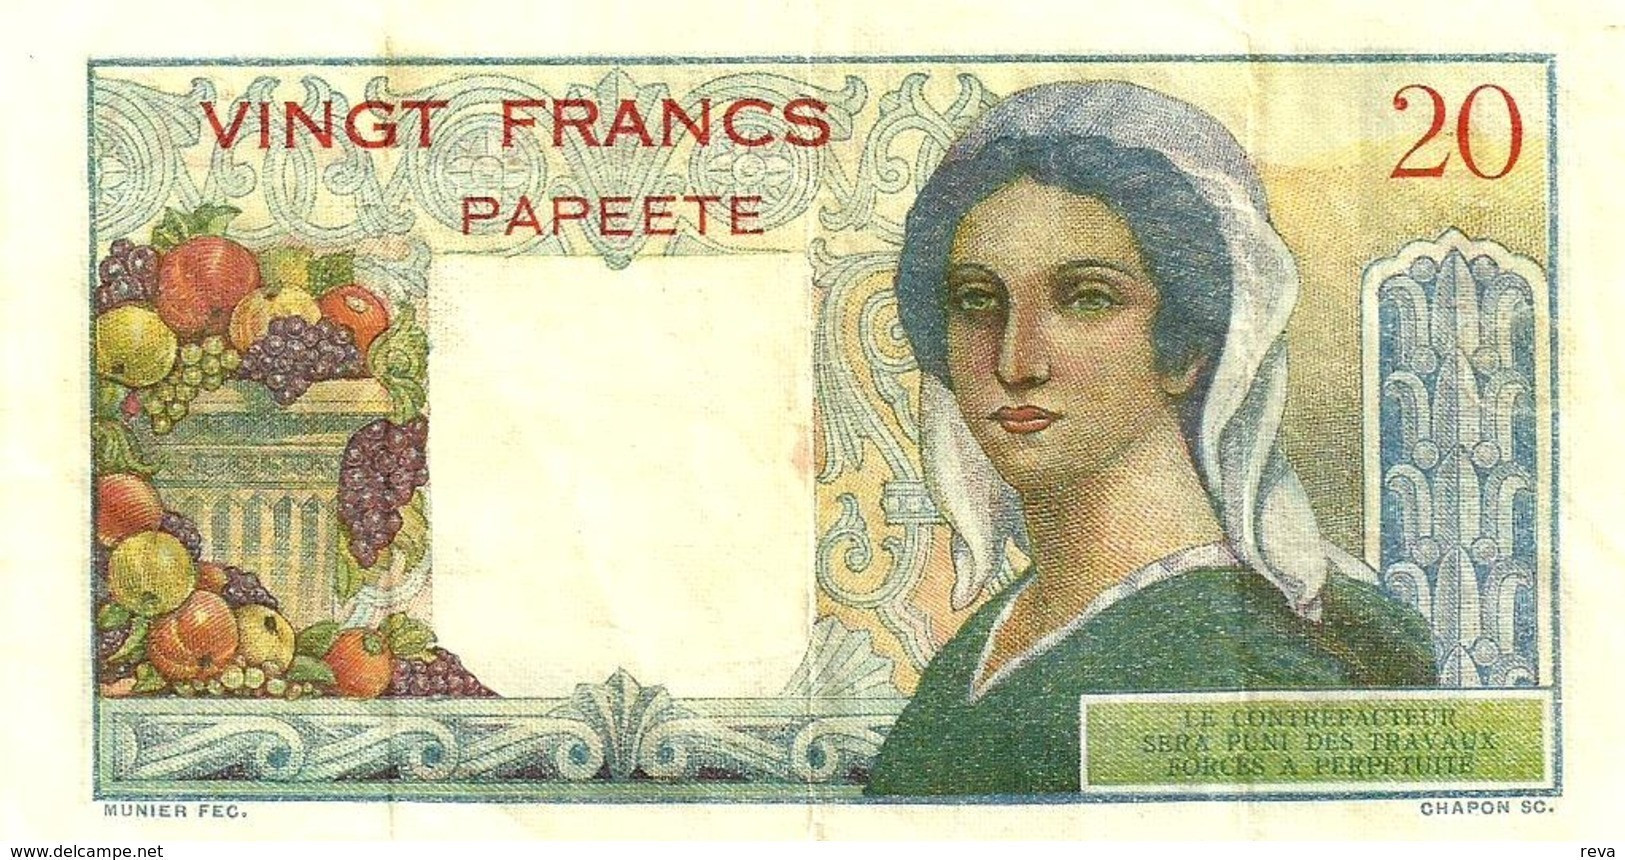 FRENCH POLYNESIA 20 FRANCS GREY MAN HEAD FRONT WOMAN BACK NOT DATED(1963) P21c 3RD SIG VARIETY F+ READ DESCRIPTION!! - Papeete (Französisch-Polynesien 1914-1985)